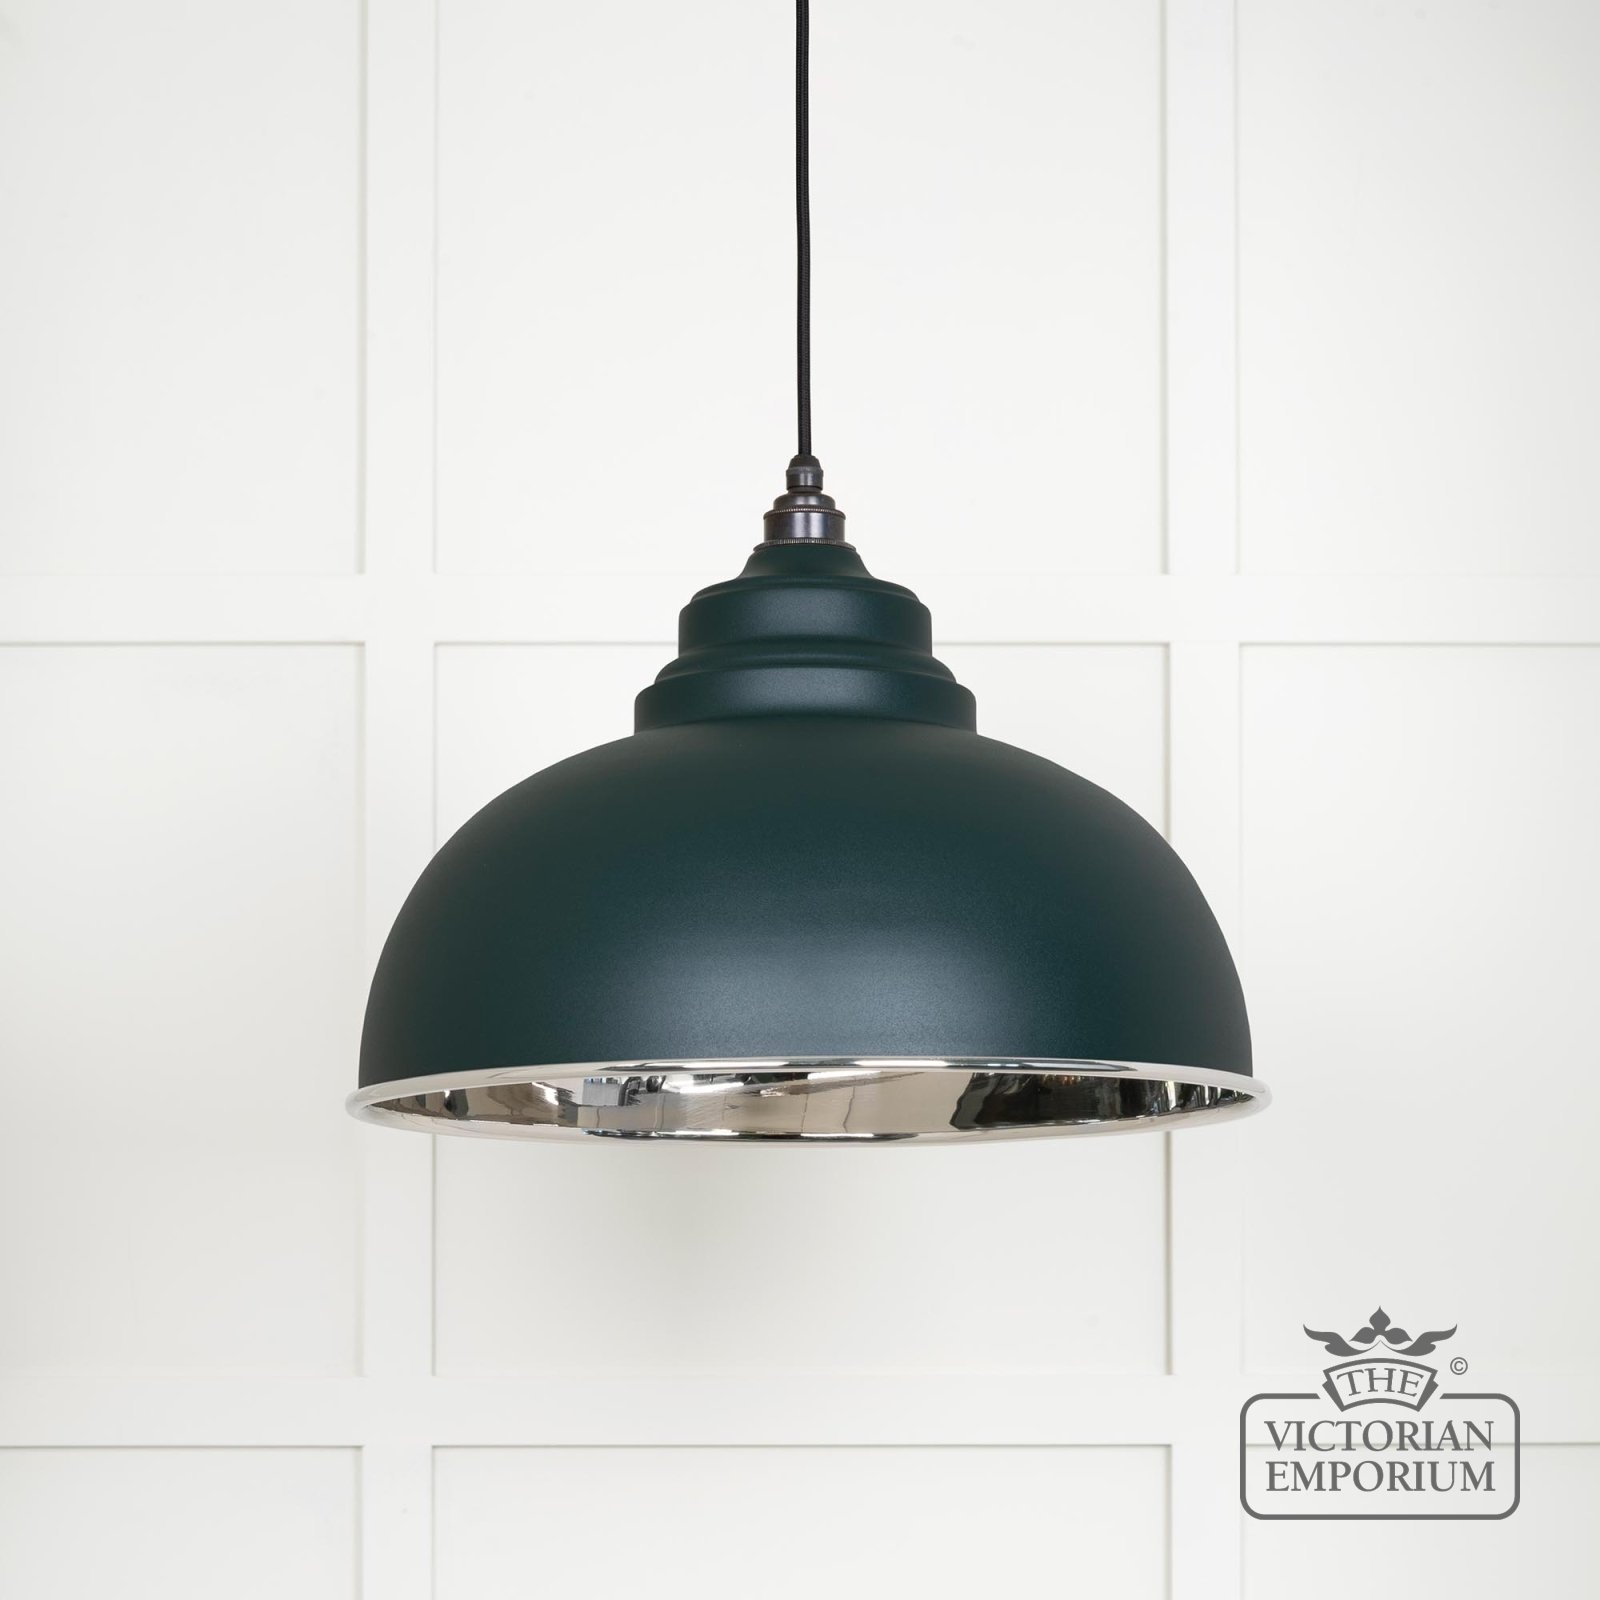 Harlow pendant light in smooth nickel with Dingle exterior